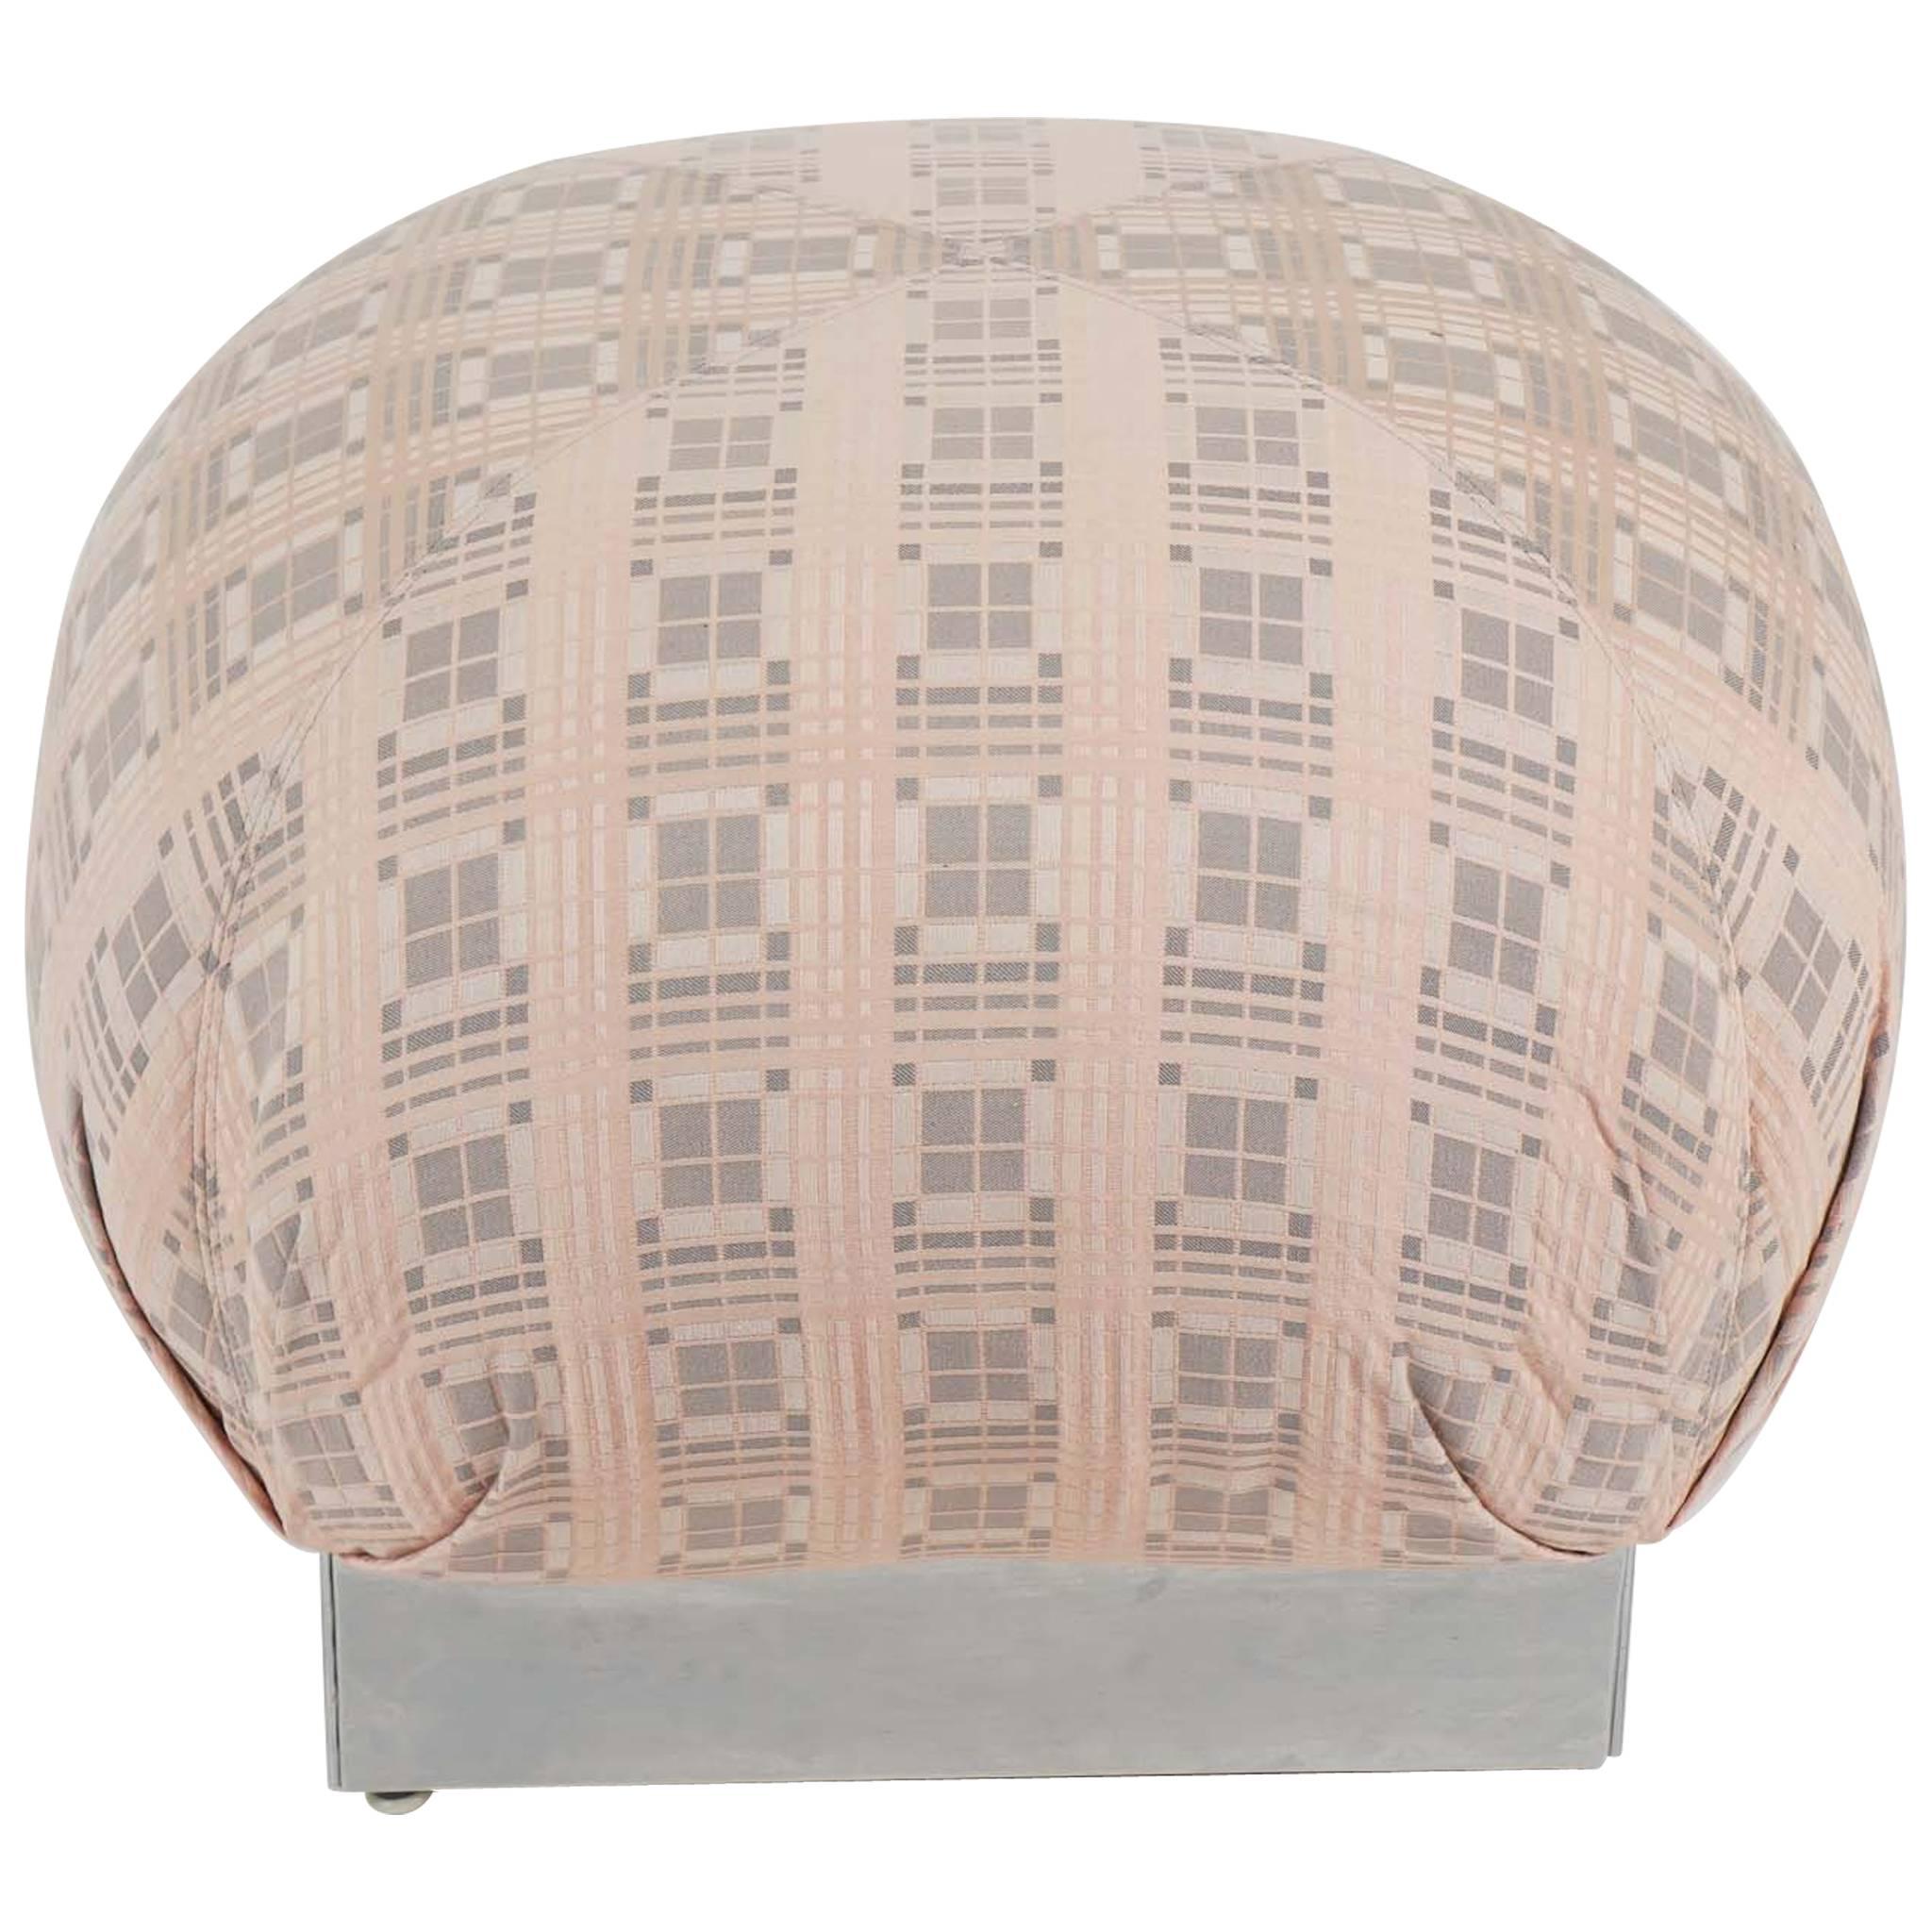 Large Square Springer Style Upholstered Ottoman/ Pouf